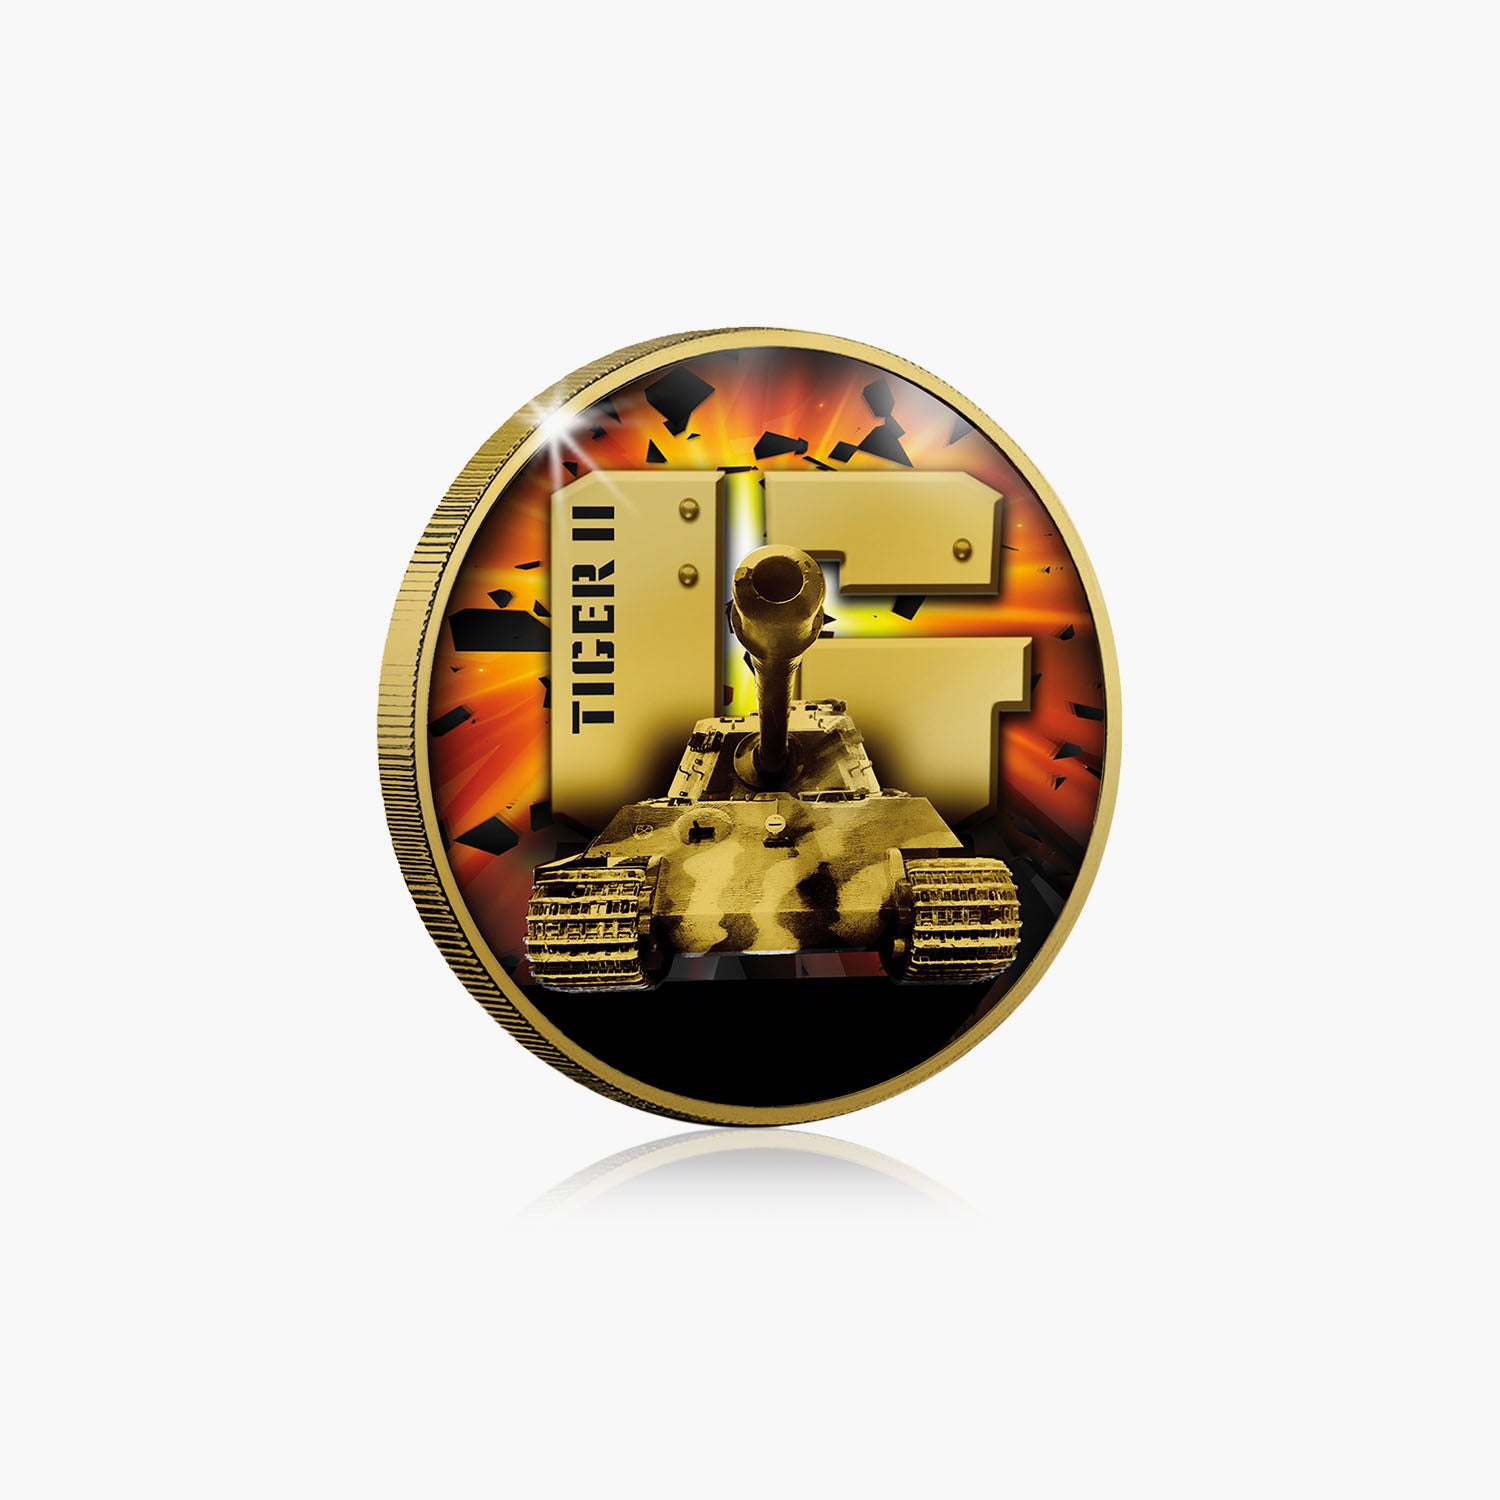 Tiger II Gold-Plated Commemorative